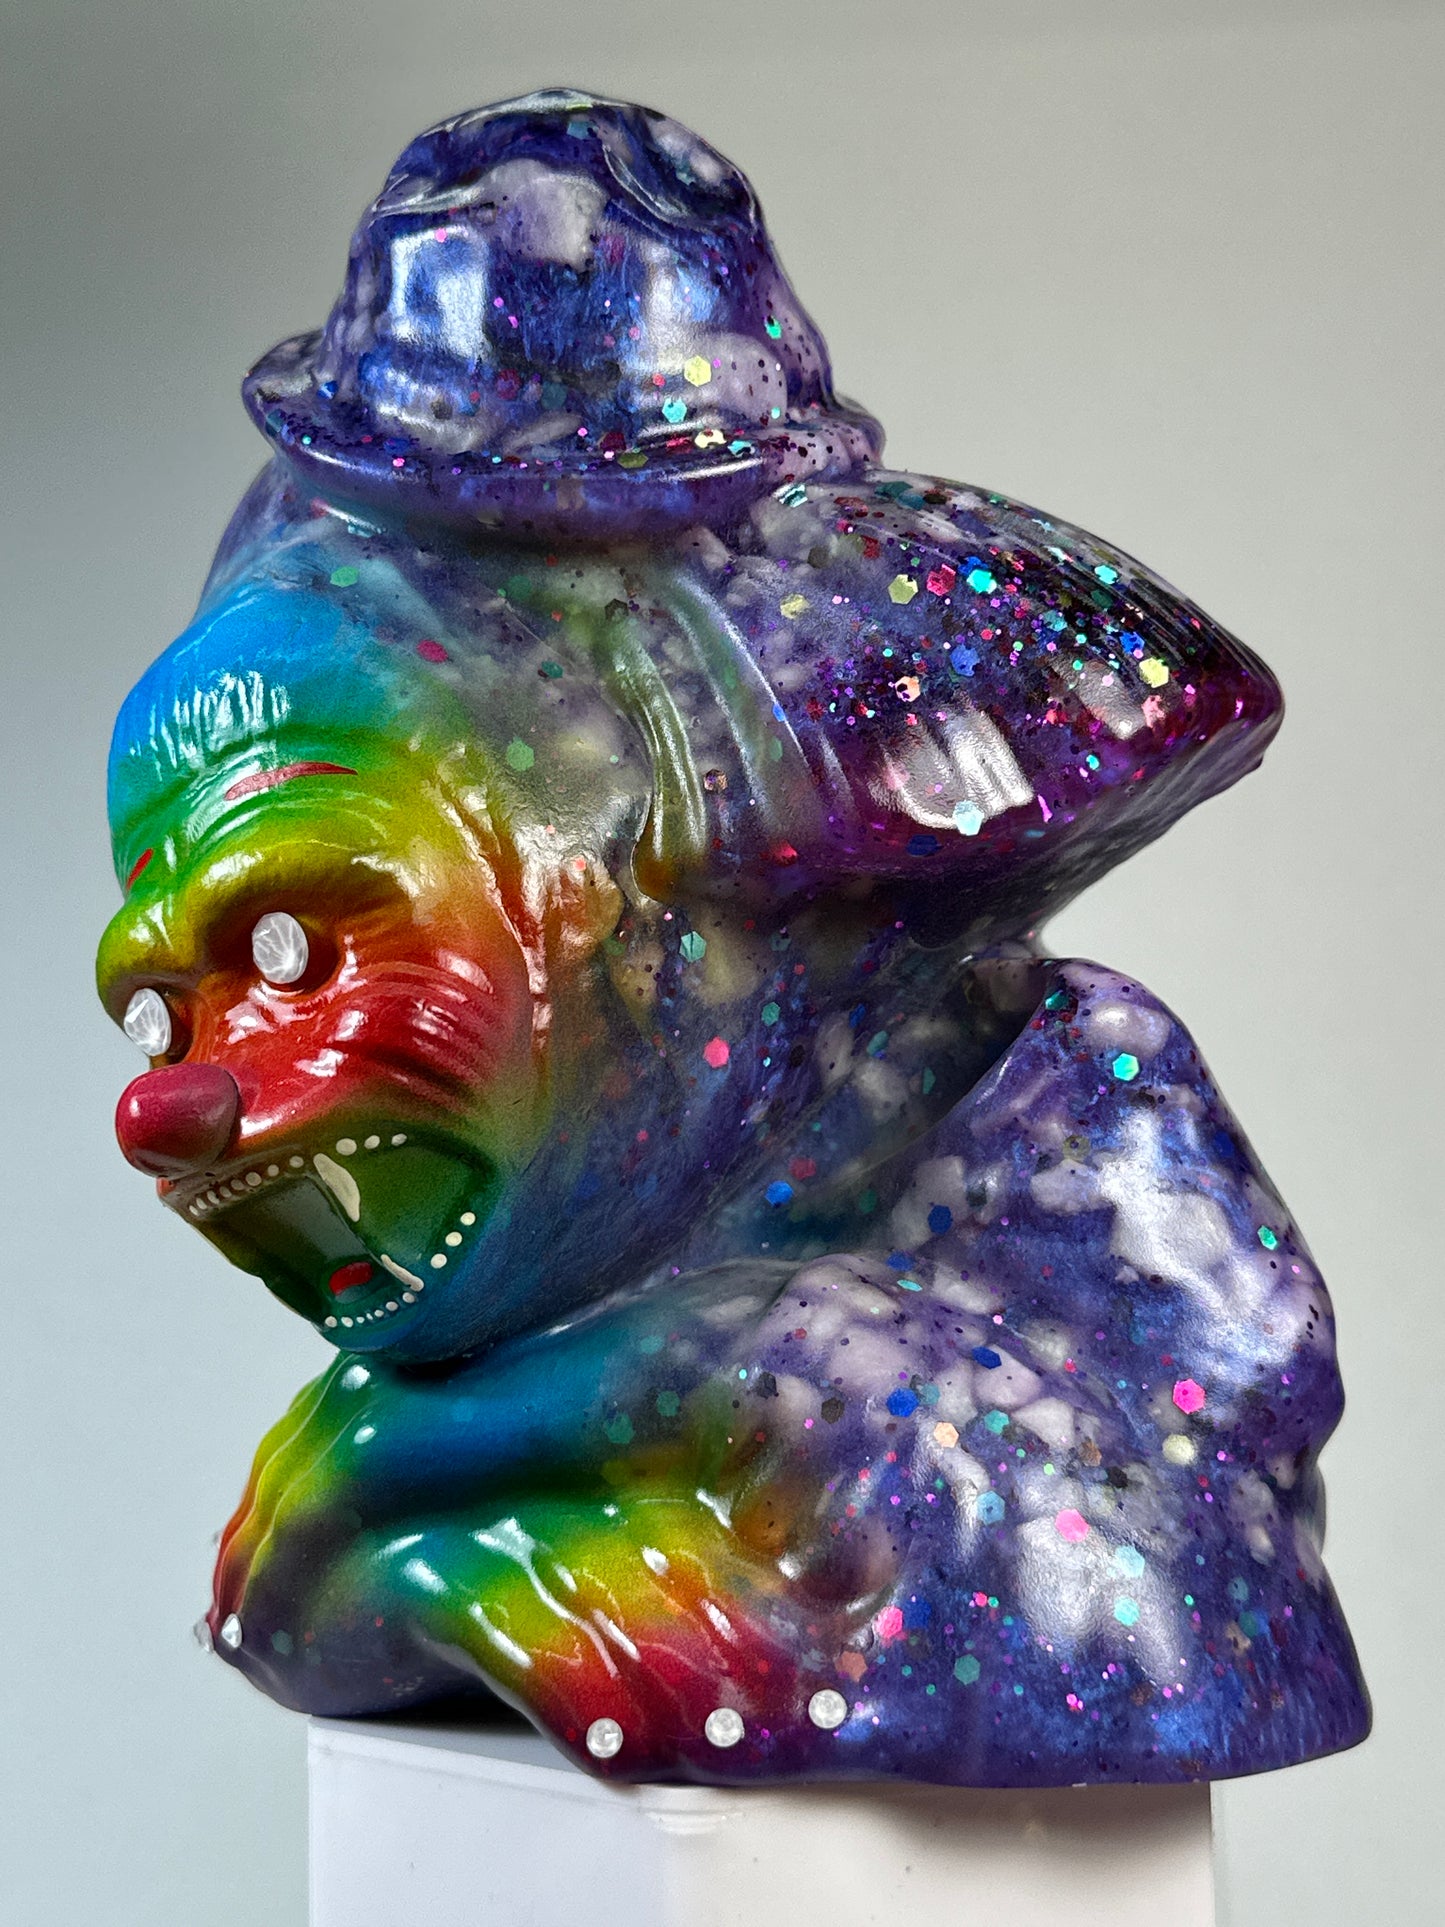 Ape Clown, Ready for His Closeup: Party Time in the Rainbow City